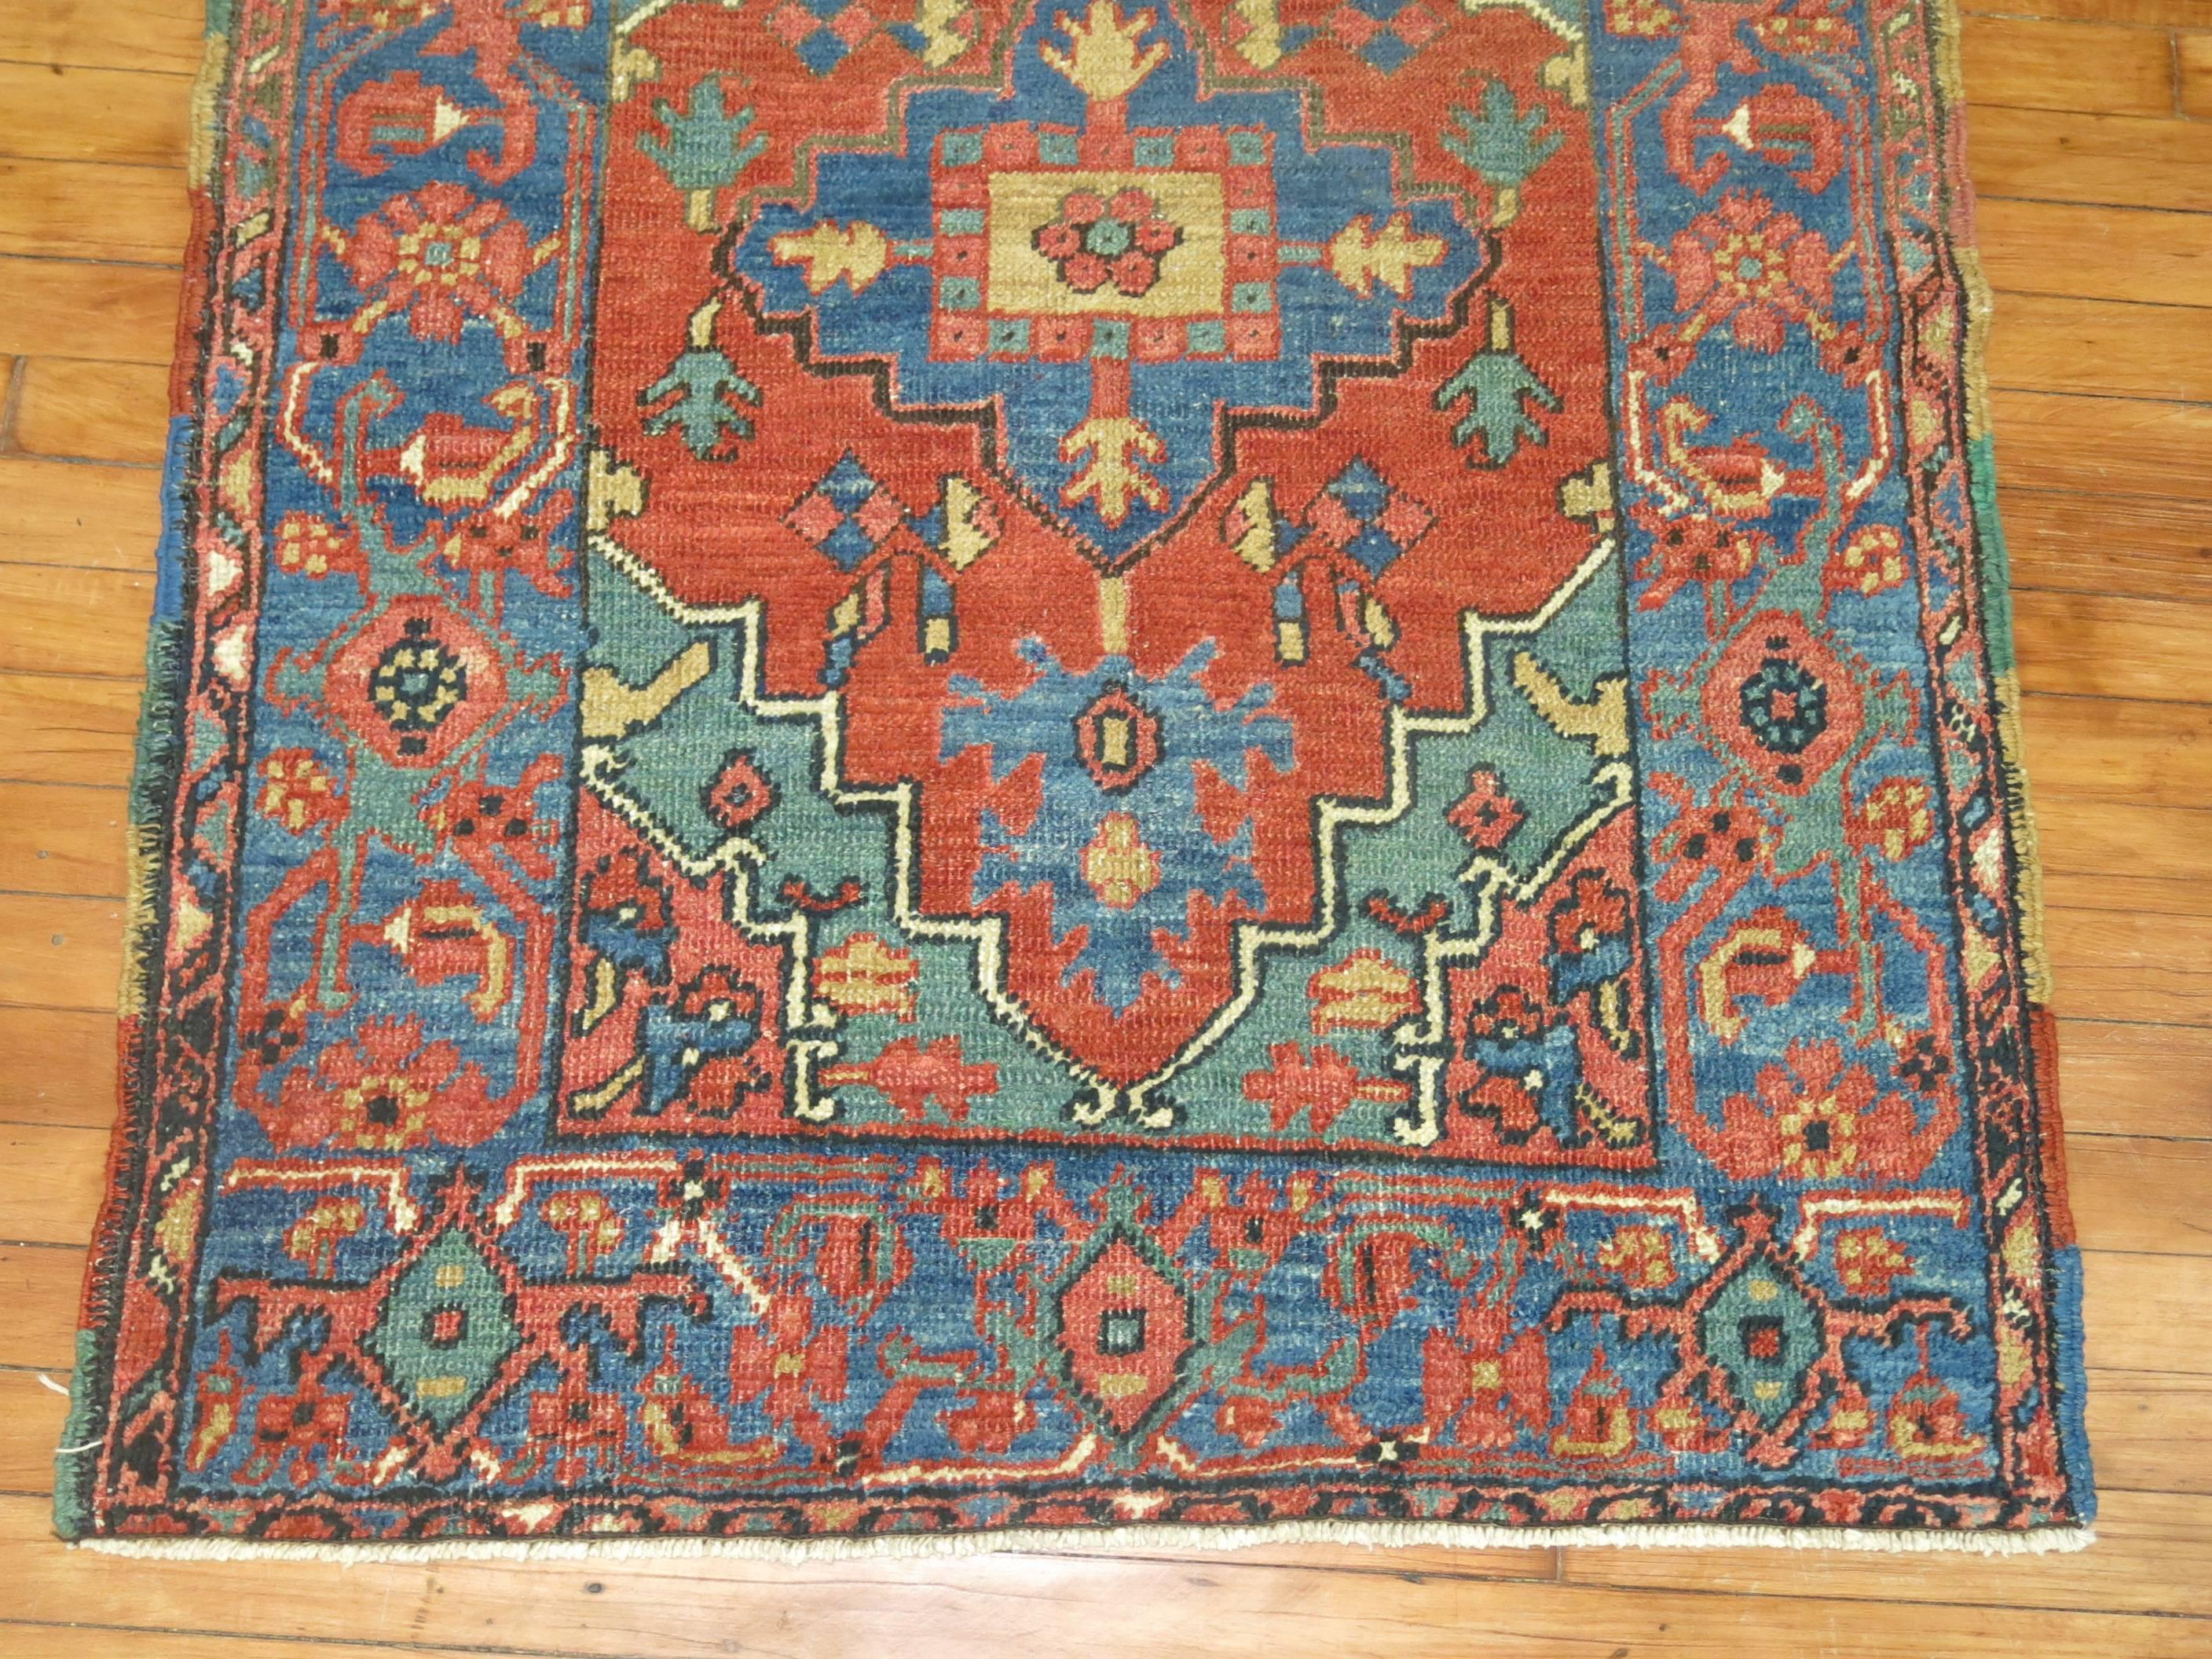 A colorful early 20th century Persian Heriz rug.